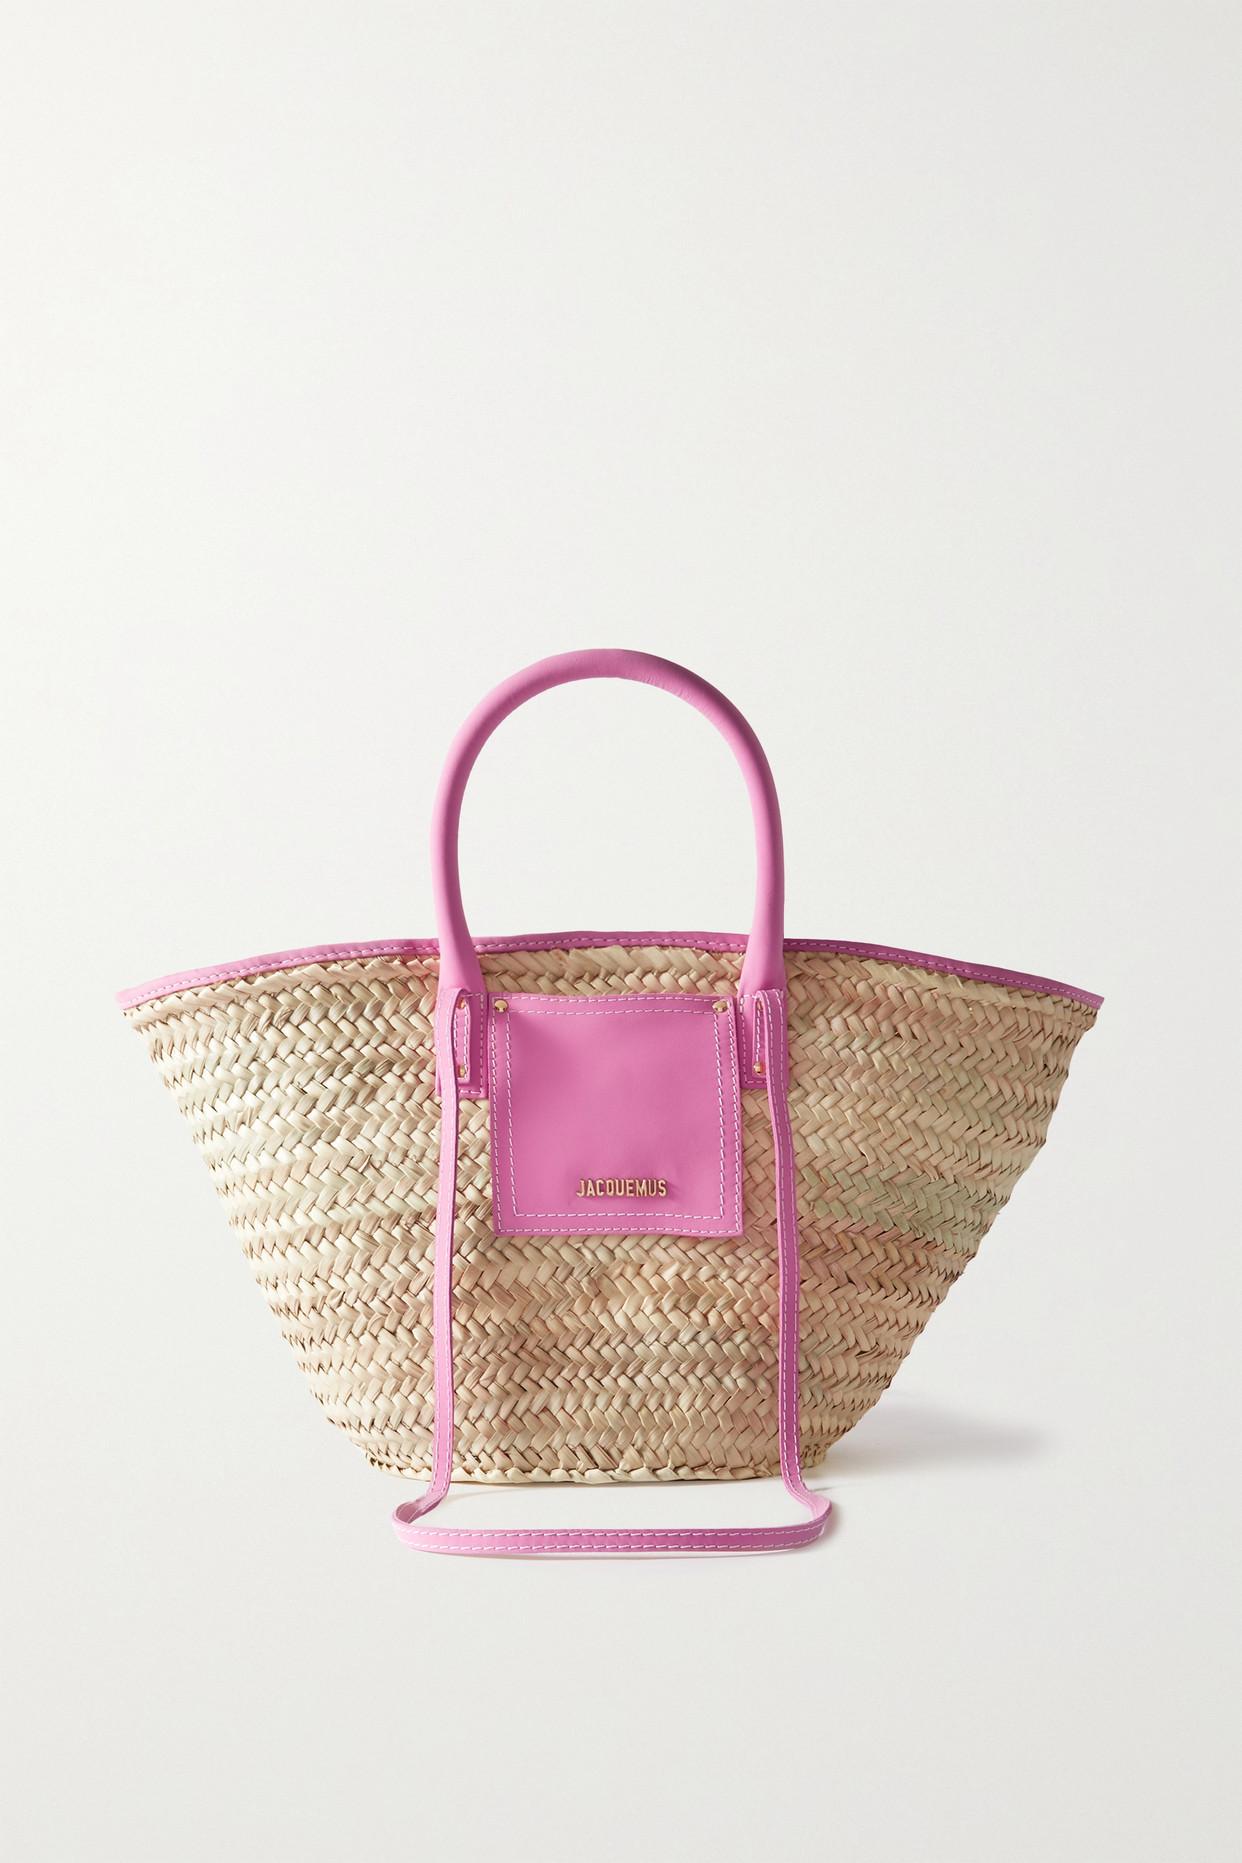 Jacquemus - Le Chiquito Long Leather Tote - Pink - One Size - Net A Porter